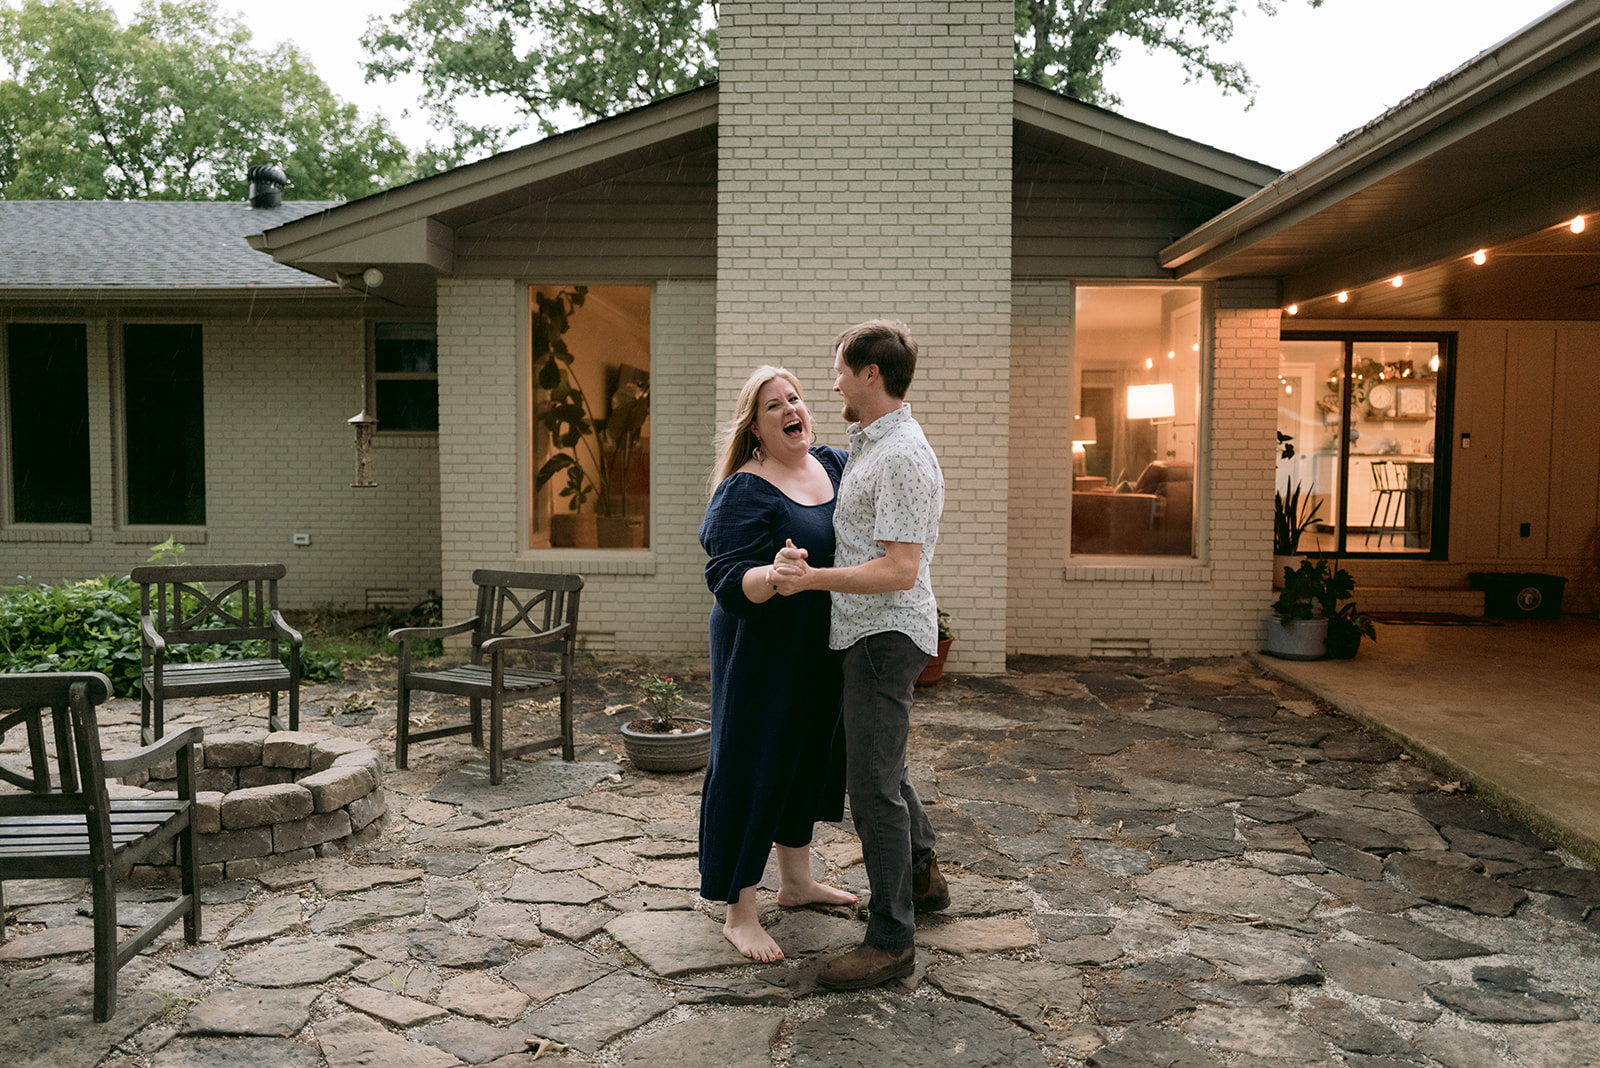 Married couple dances in the rain right outside of their home in Searcy, Arkansas.